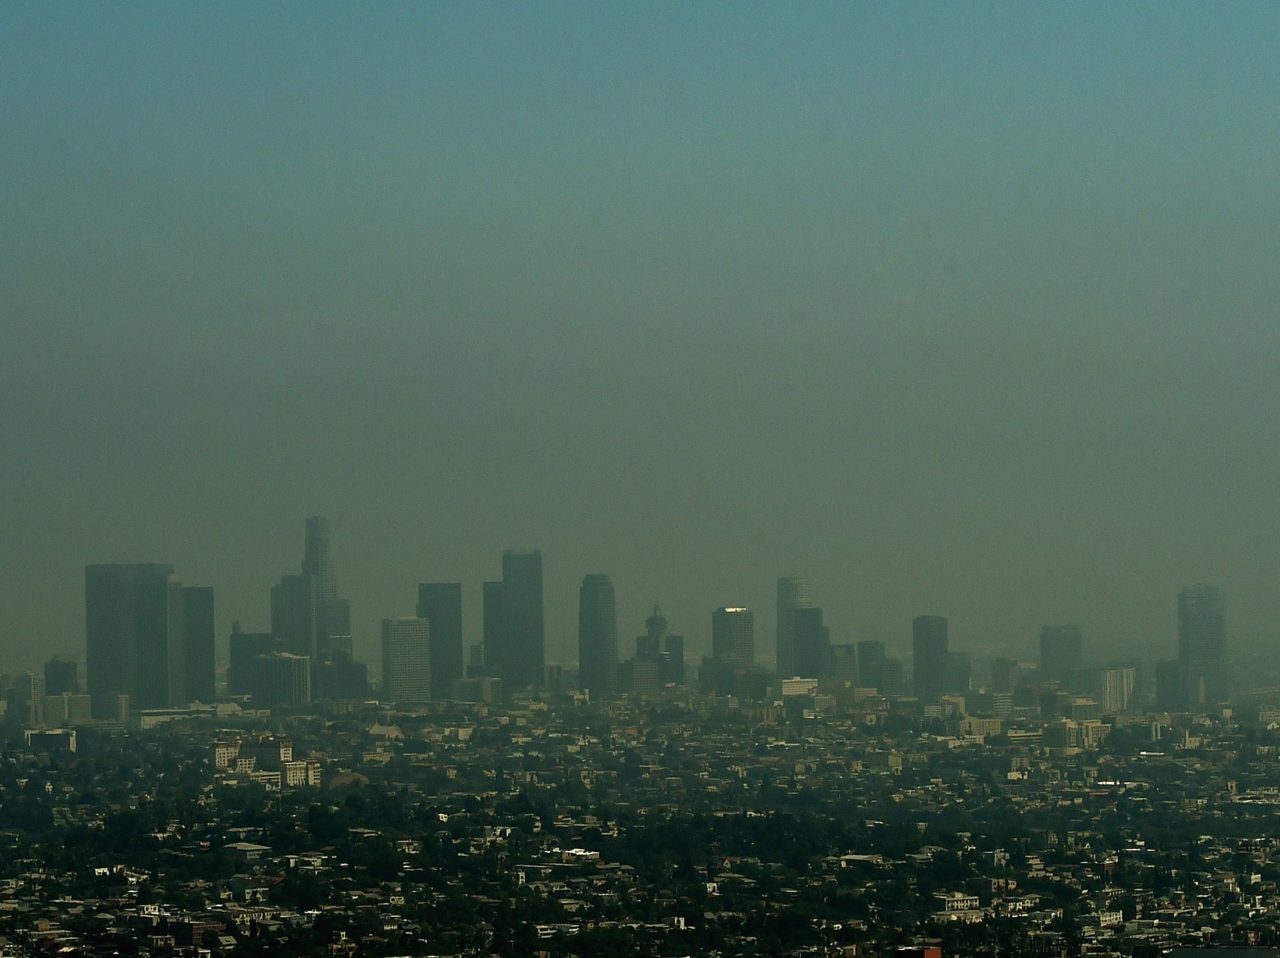 California Has 6 of Top 10 Worst Cities for Smog in America Breitbart